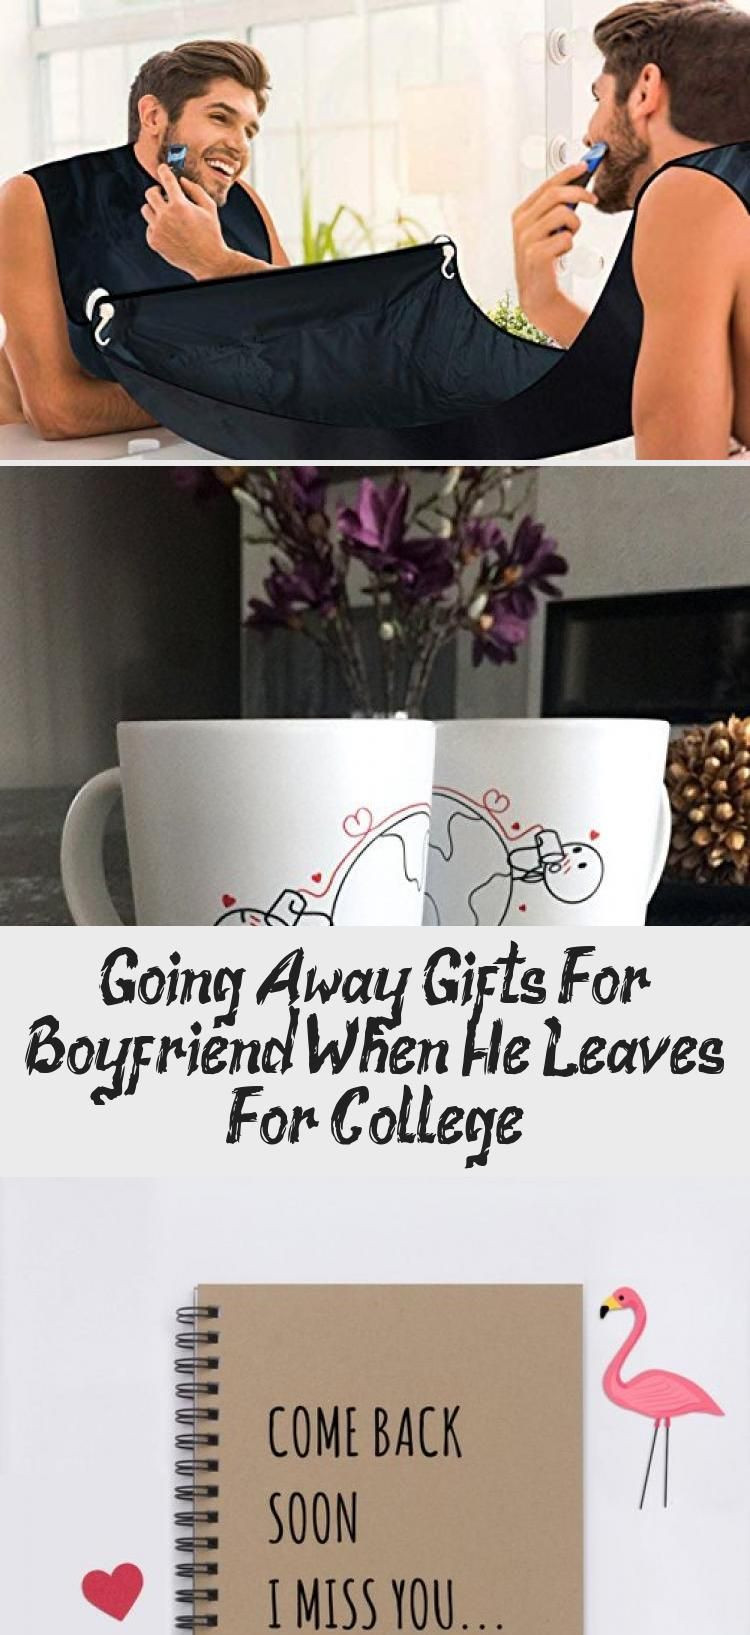 Boyfriend Leaving For College Gift Ideas
 Going Away Gifts For Boyfriend When He Leaves For College